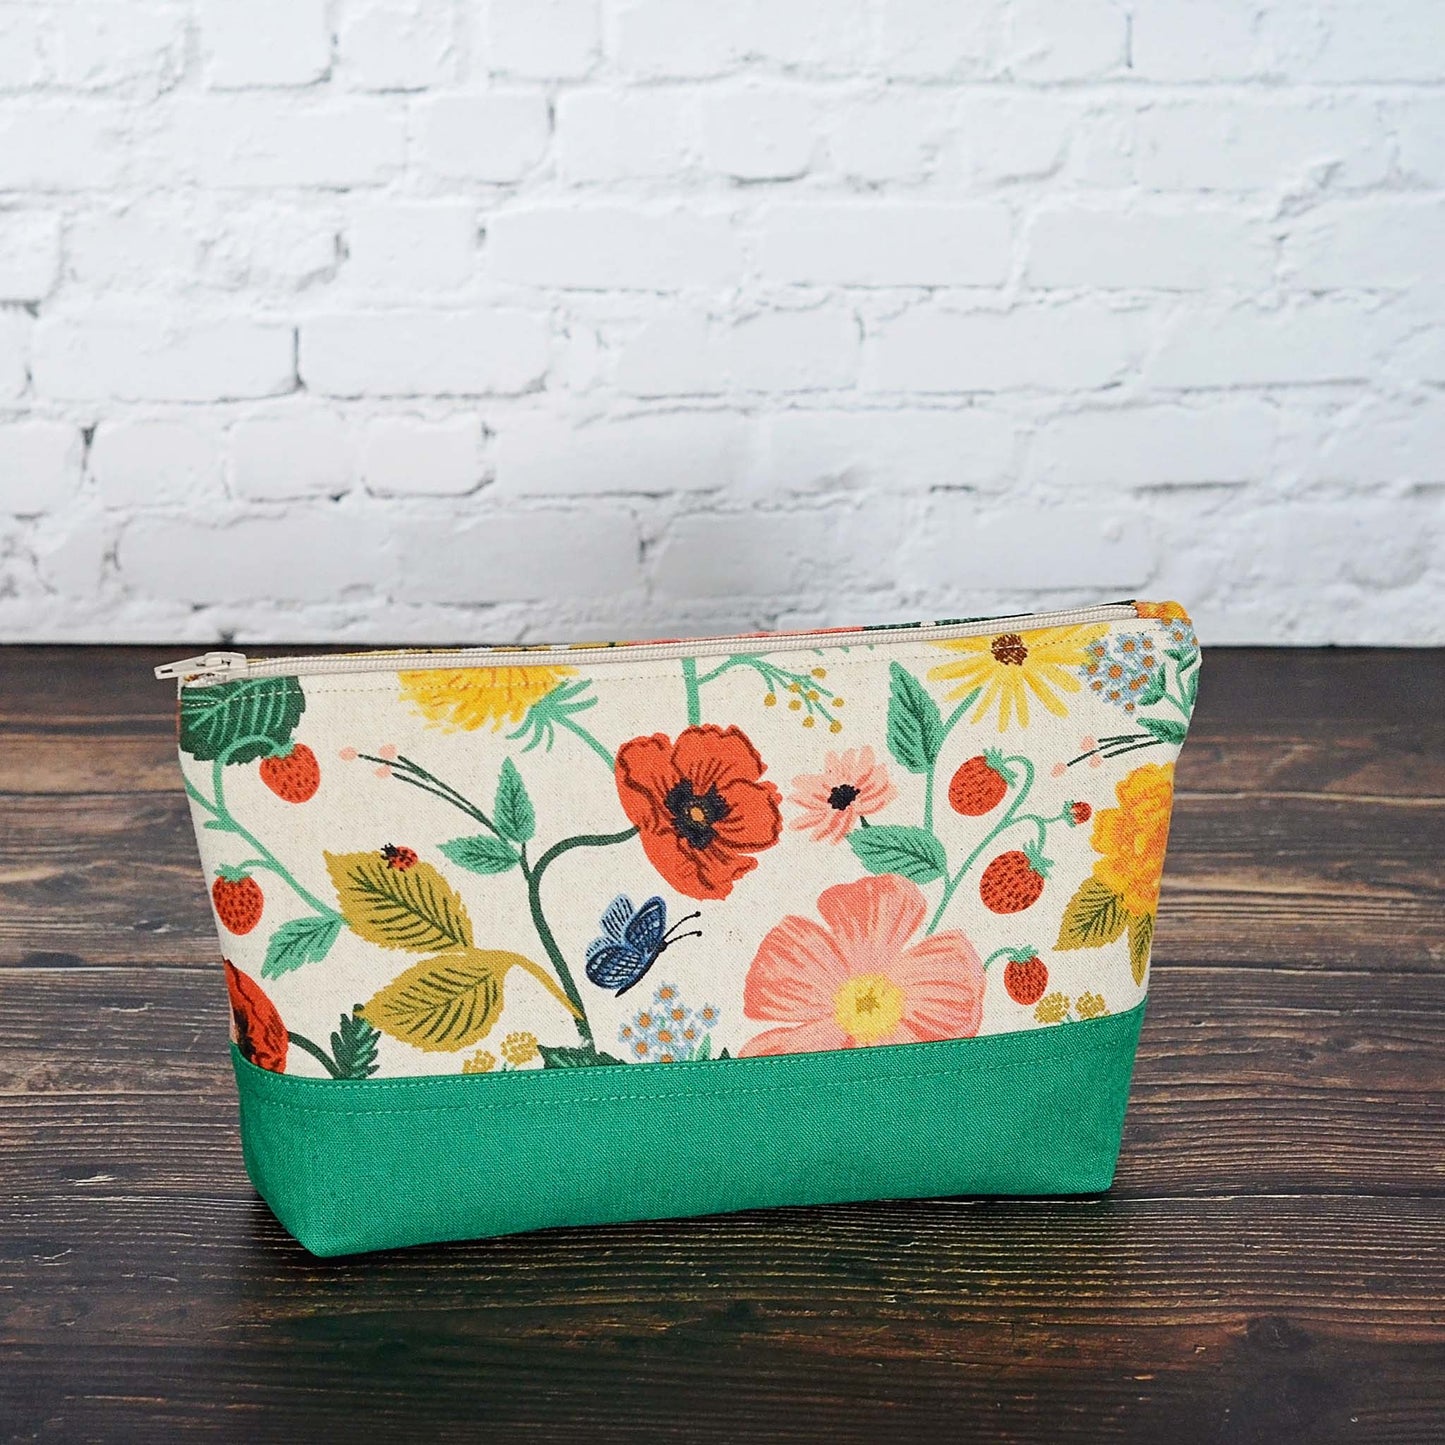 Floral and green canvas and linen accessory pouch in Camont fabrics by Rifle Paper Co.  Made in Canada by Yellow Petal Handmade.